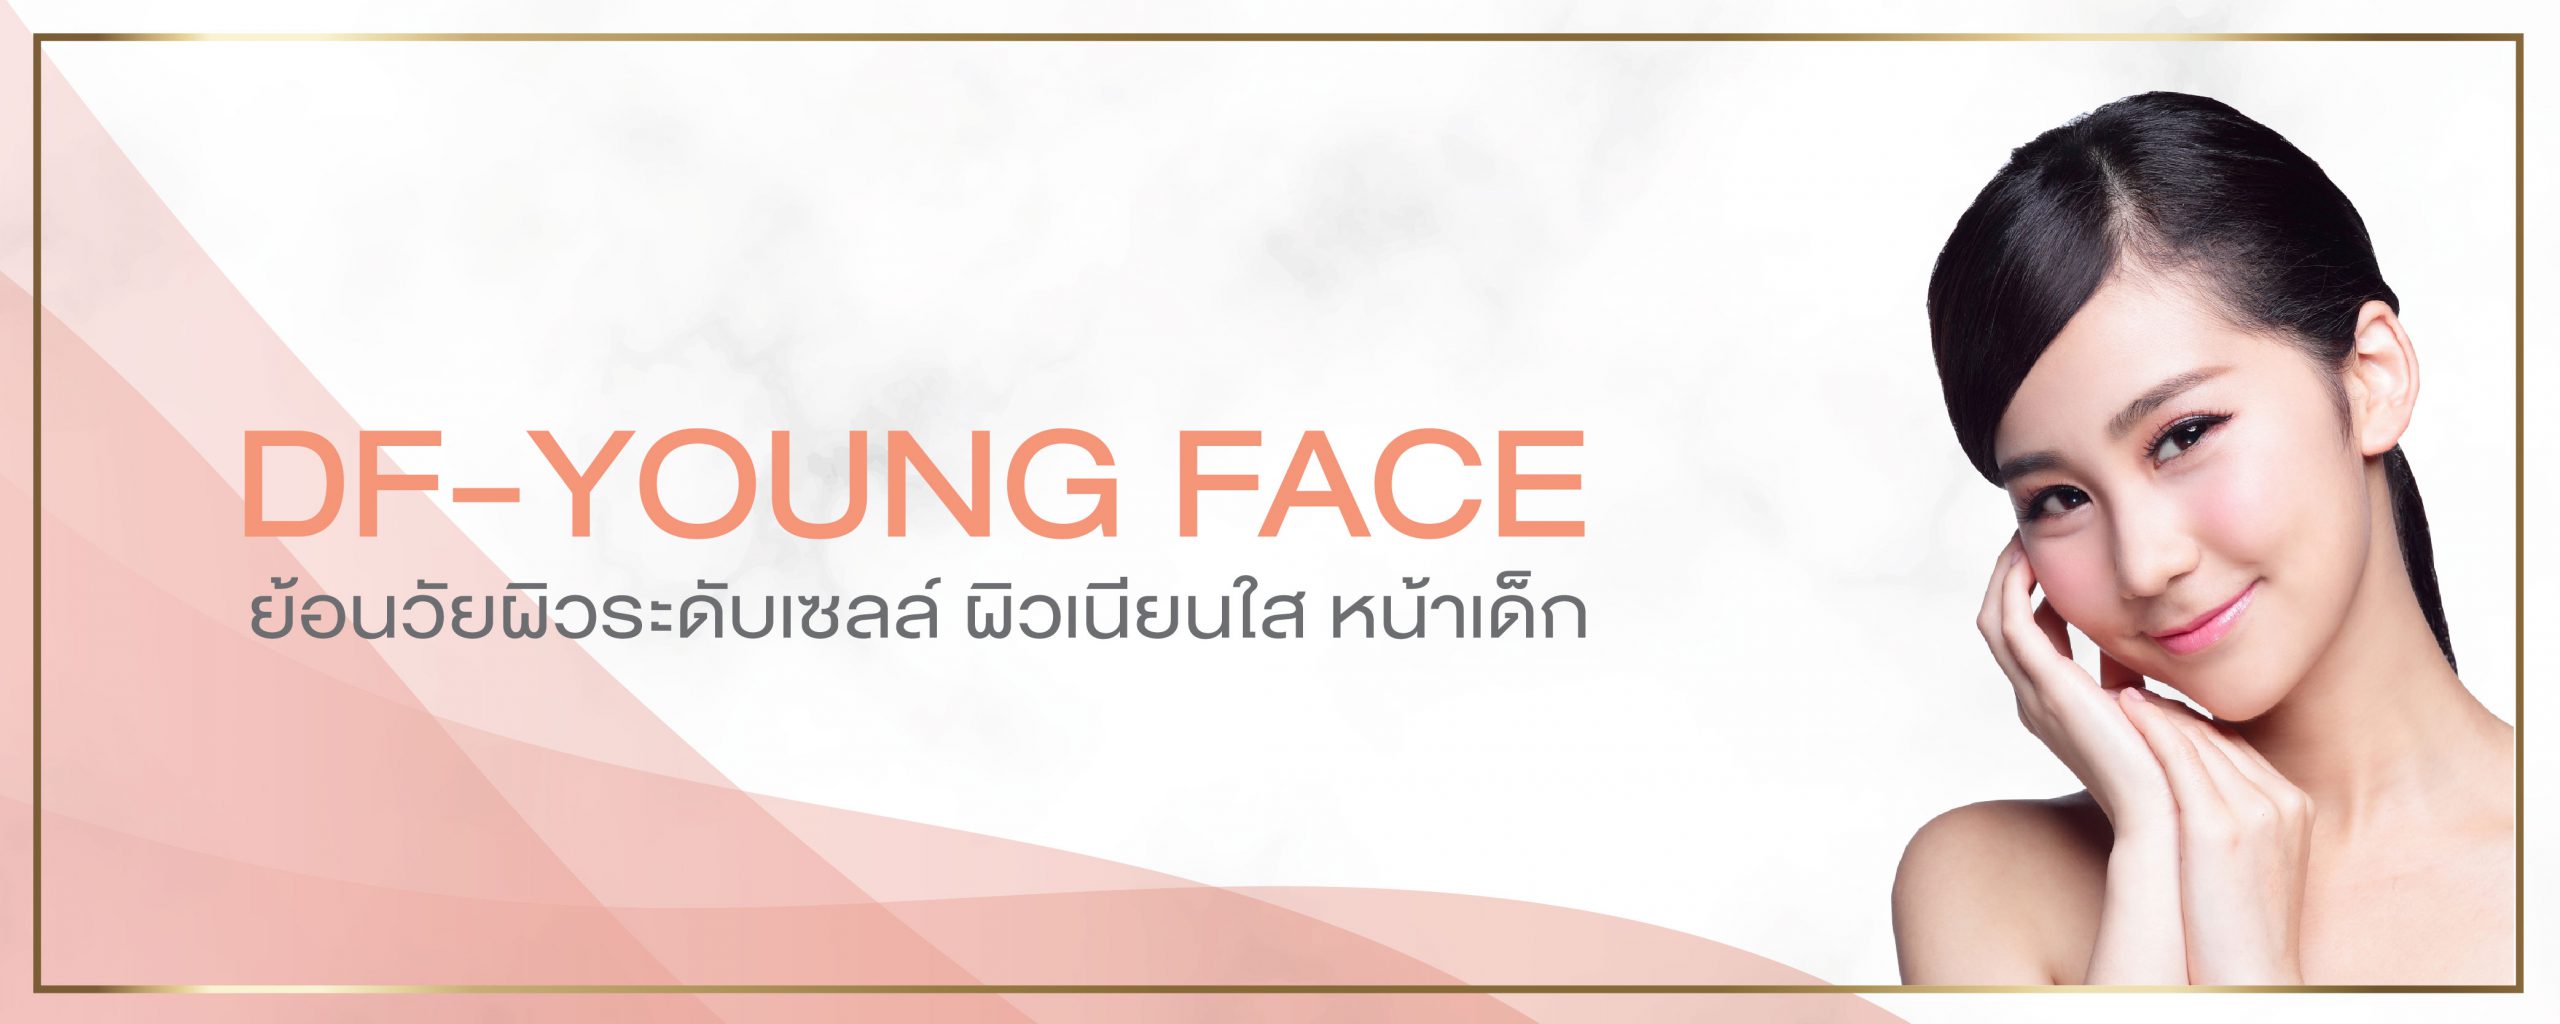 web_df young face_1000x400-01